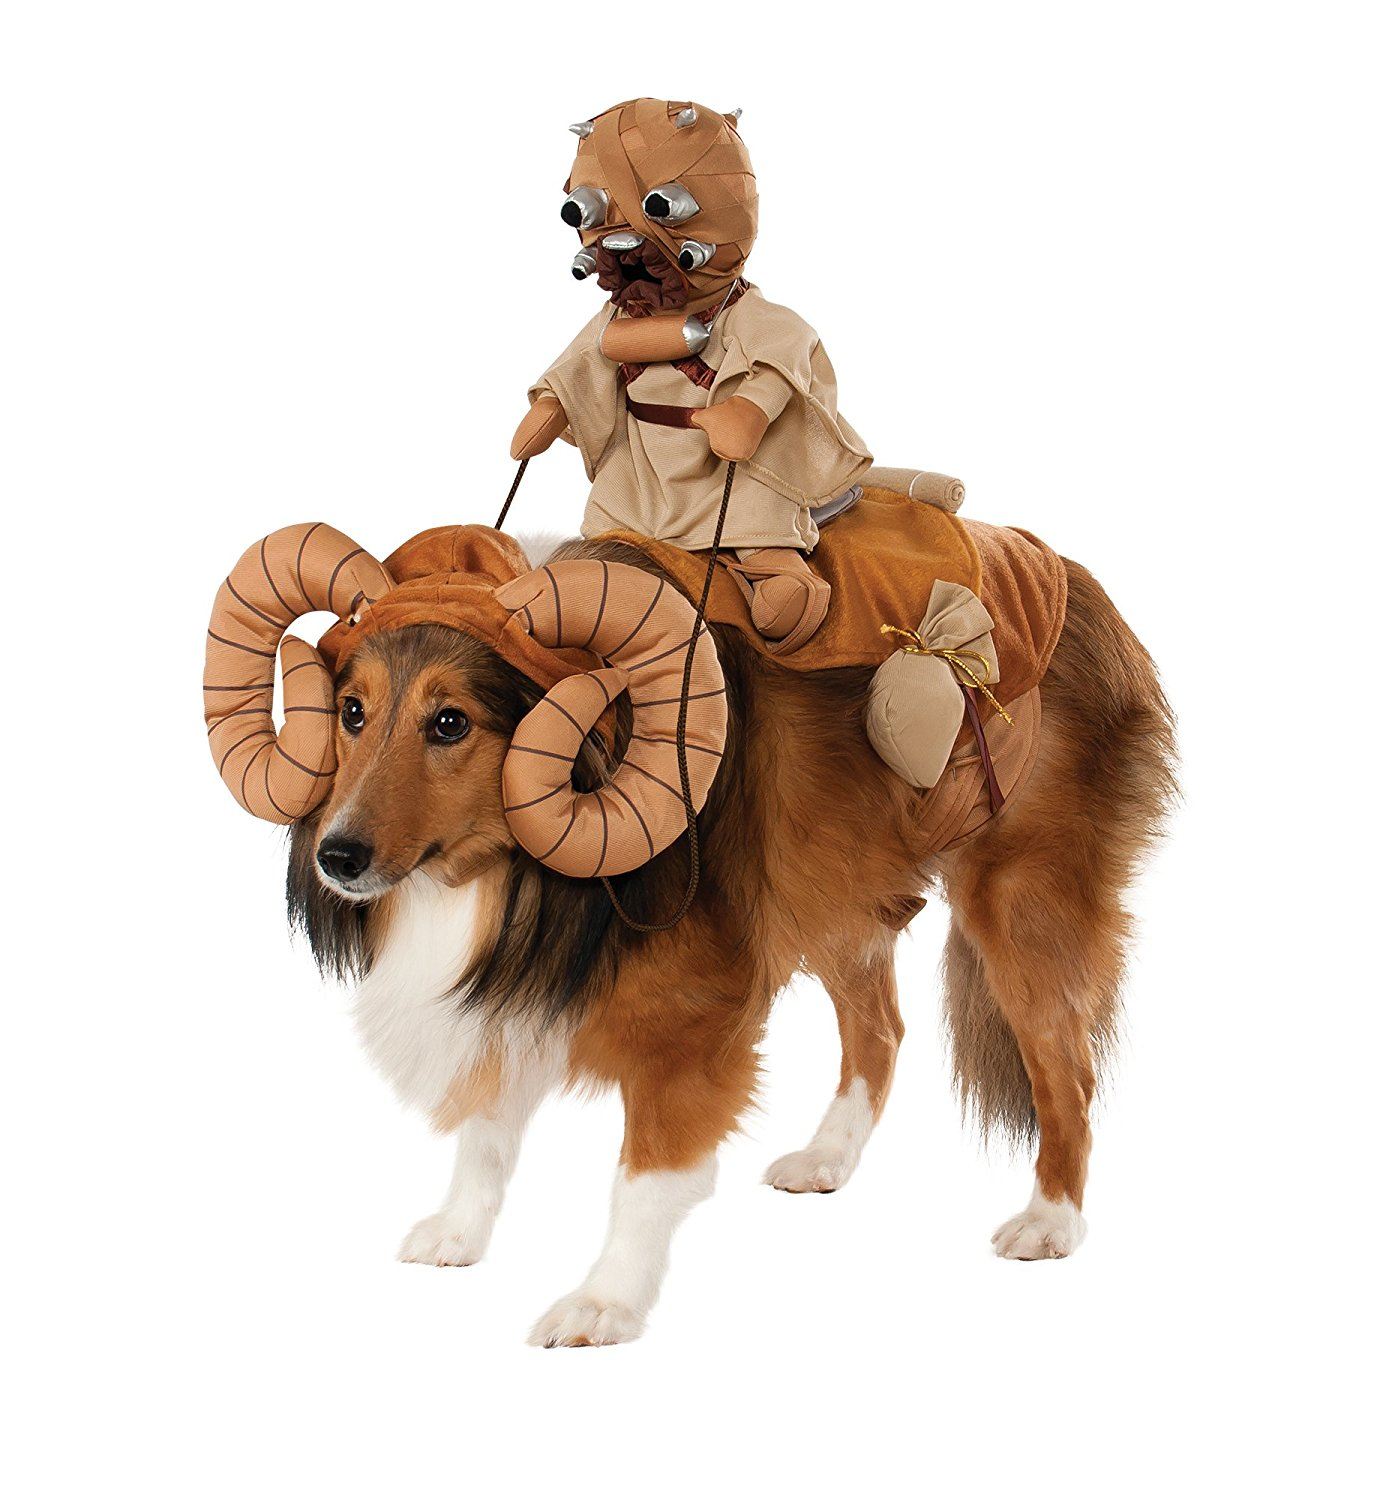 Want to make your dog look like a Bantha from Star Wars? </br></br>Well you can for some reason, if you buy a doggy costume <a href=https://amzn.to/2mE30Um "nofollow" target="_blank">here.</a>